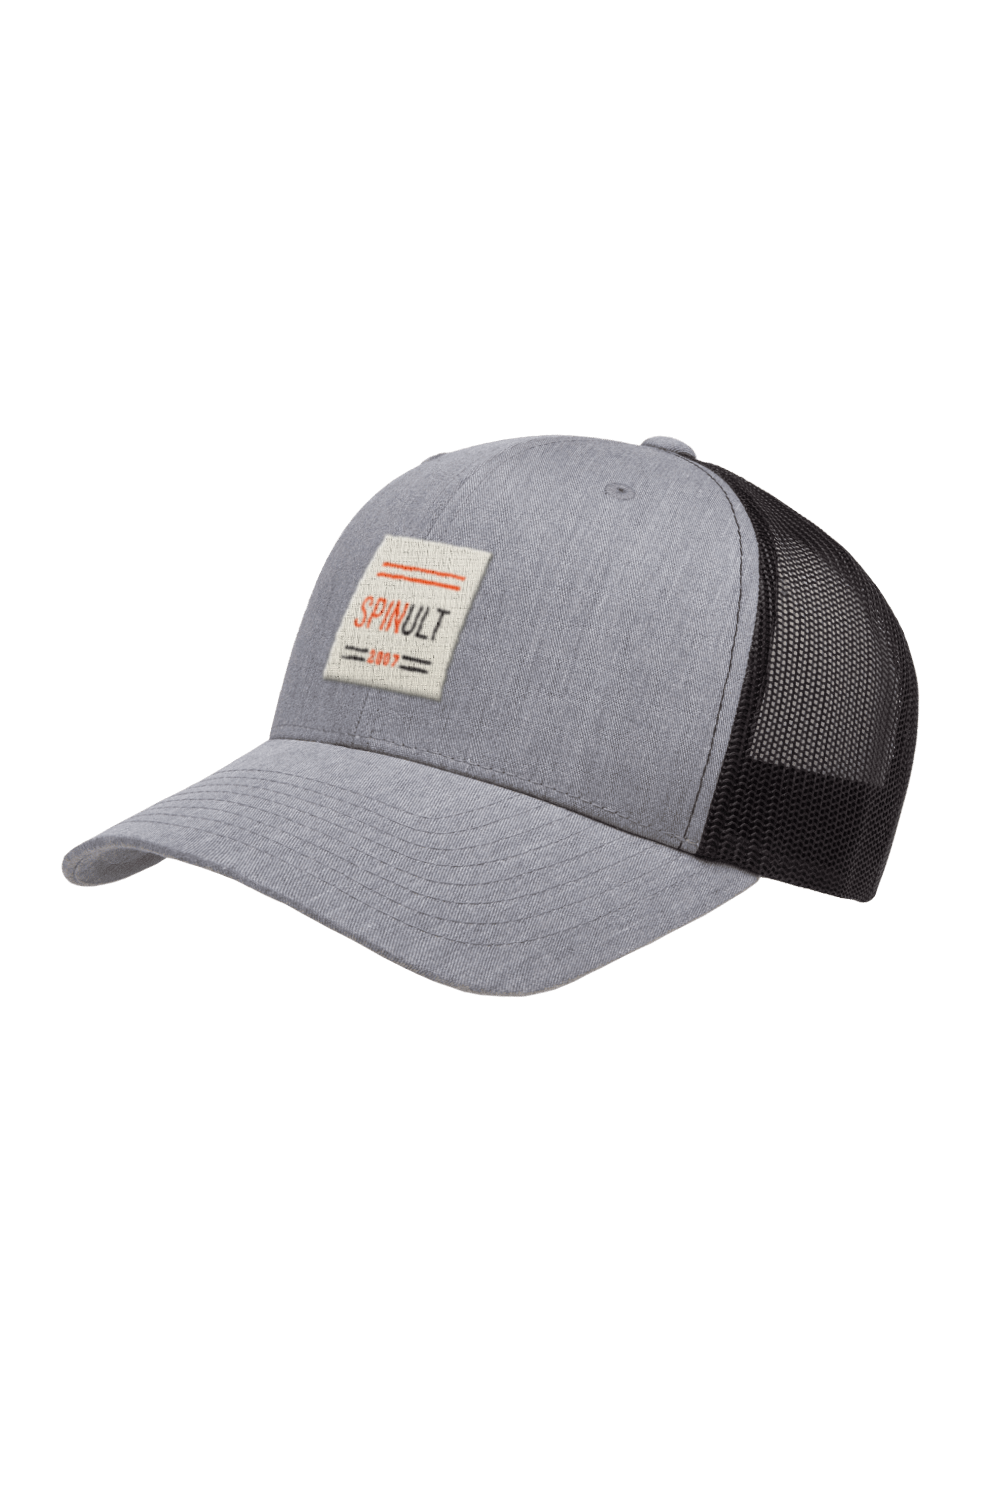 Don't Be Square Trucker Hat